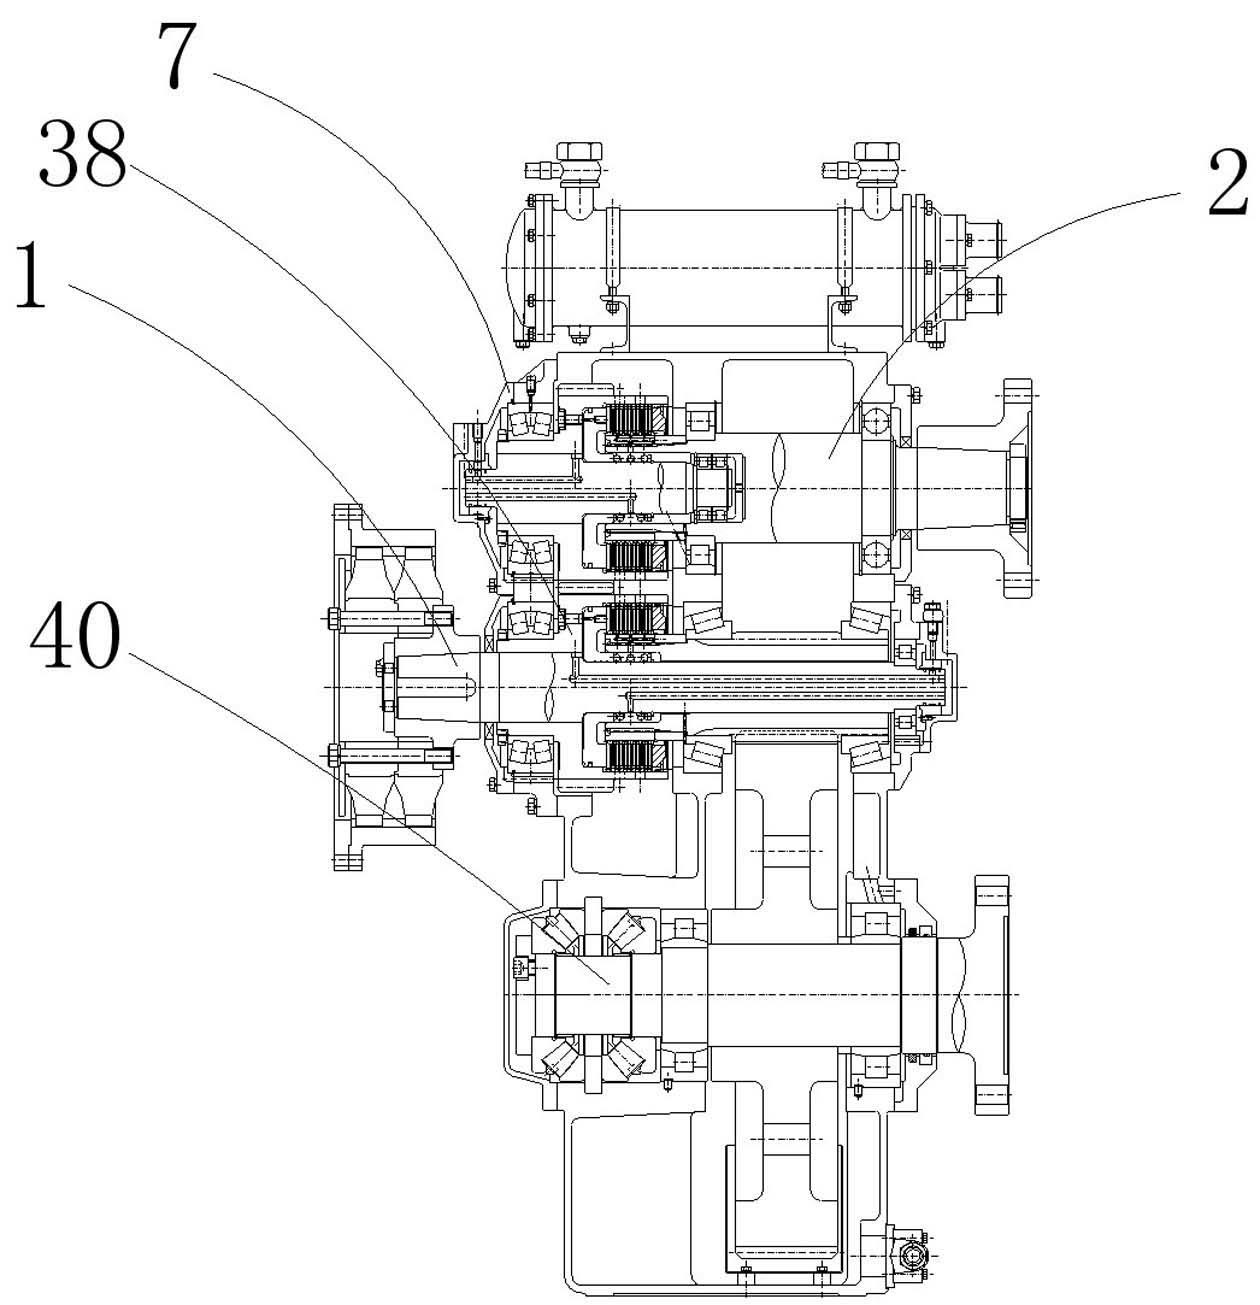 Gearbox with reversing, ahead running, clutching and full-power PTO (Power Take Off) output functions for ship